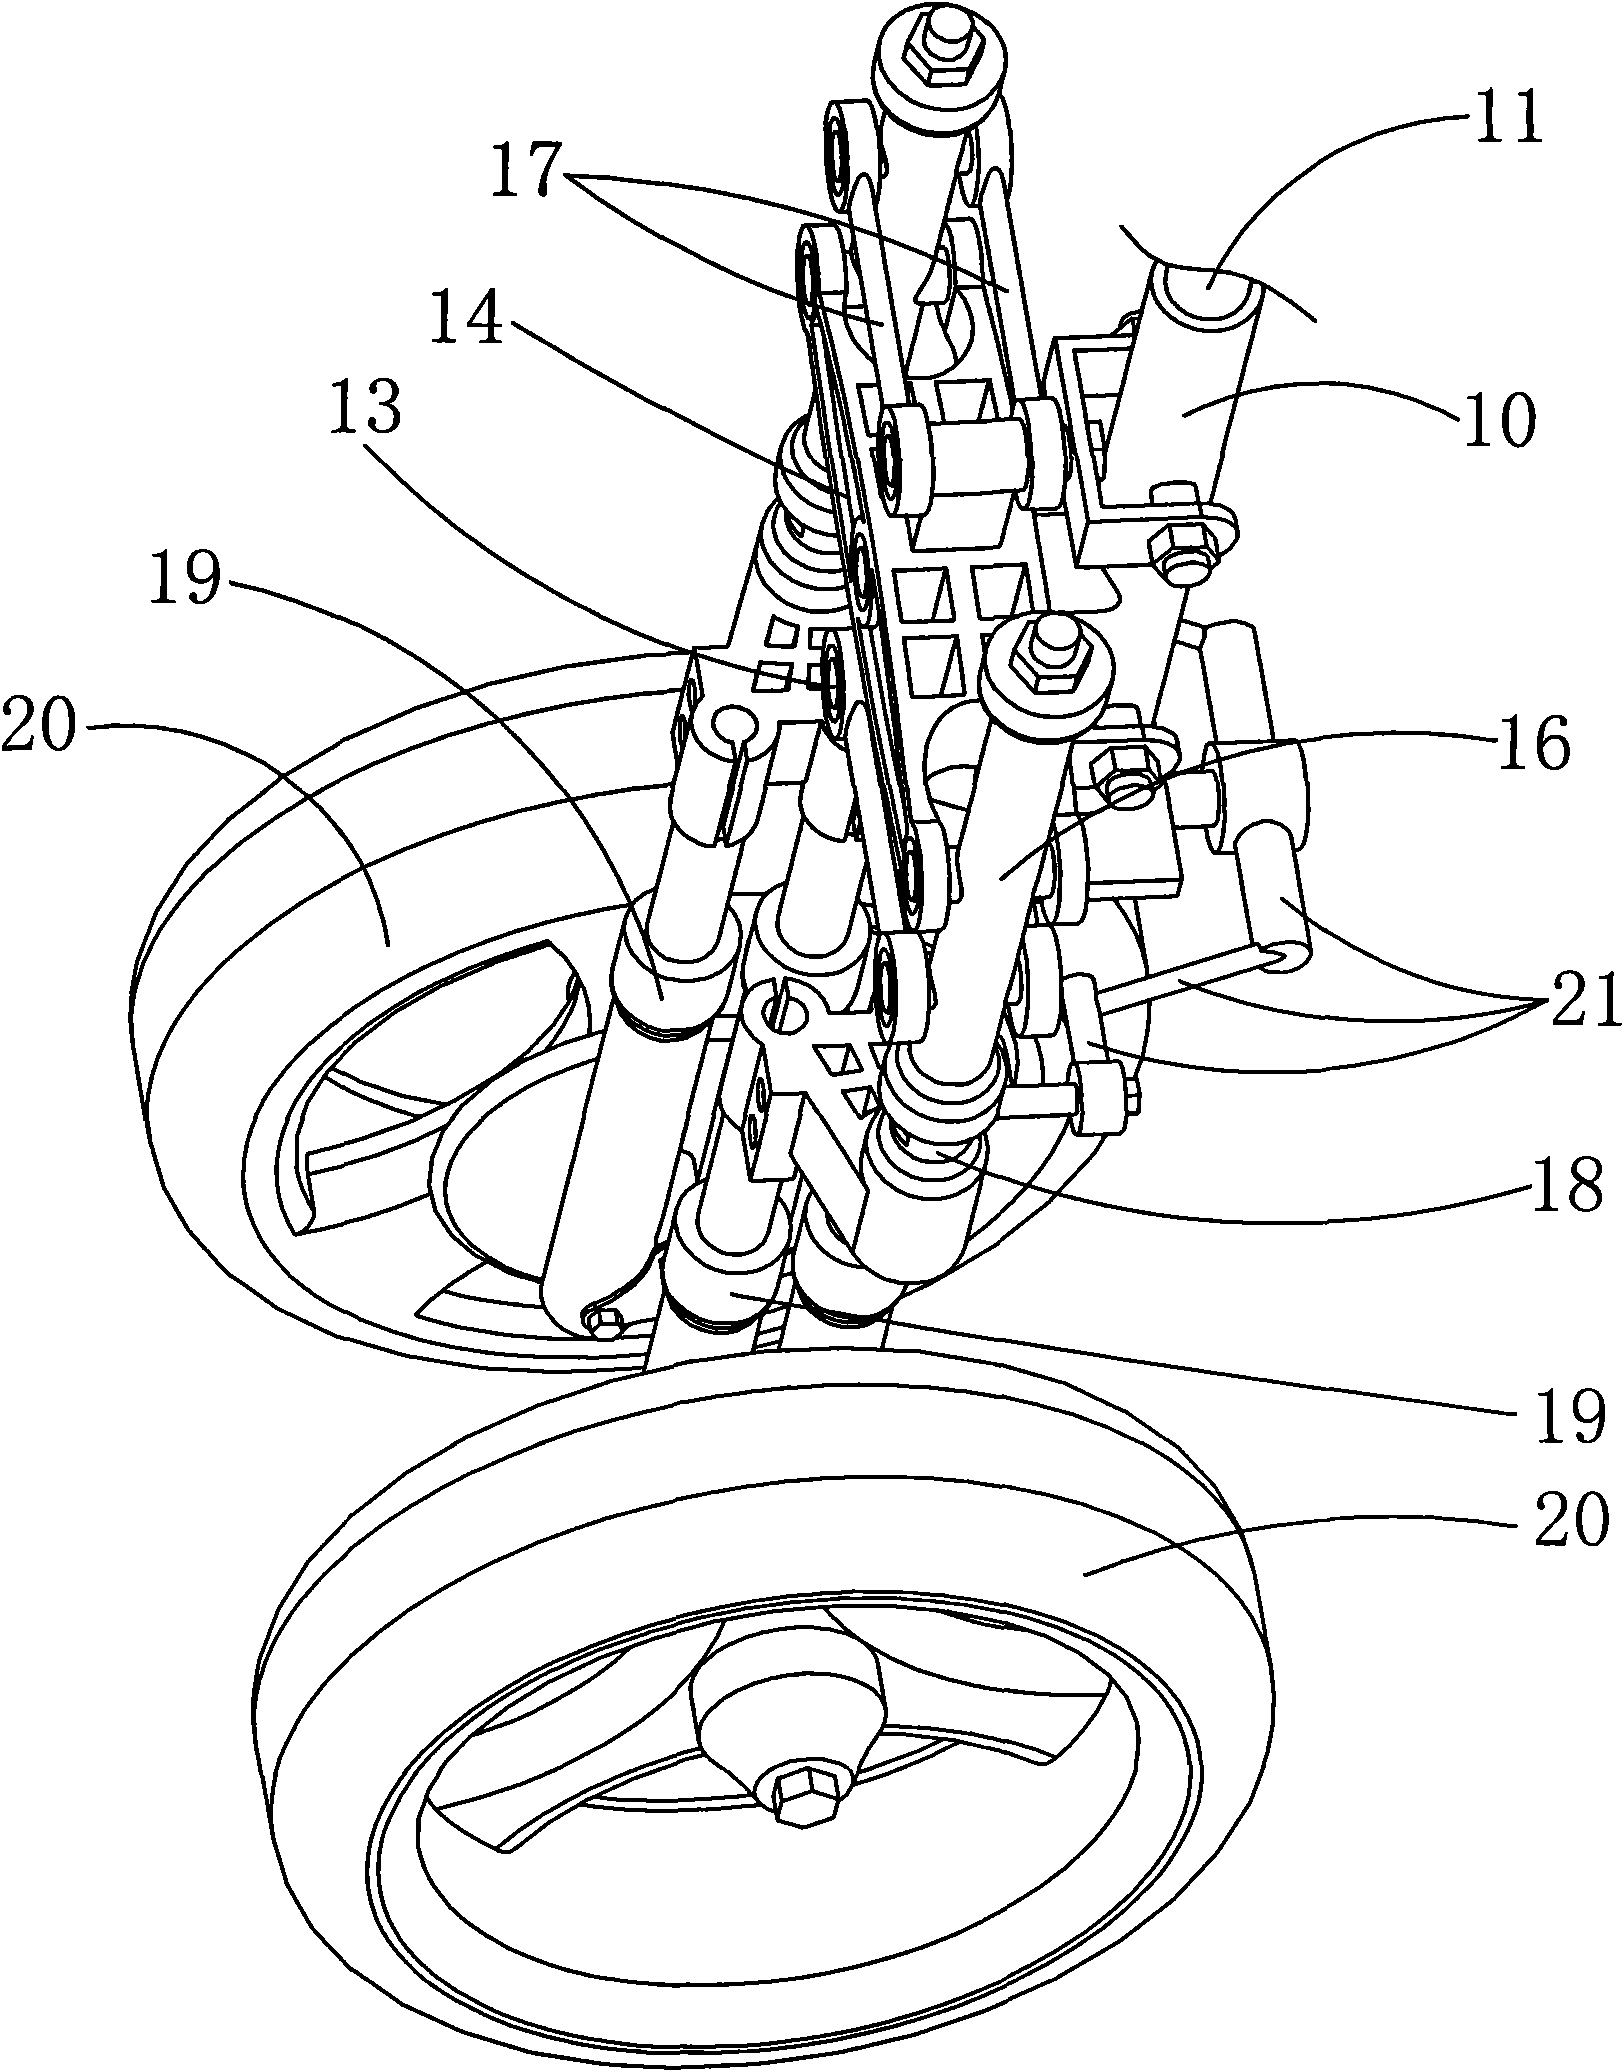 Link mechanism of double front wheels of motorcycle